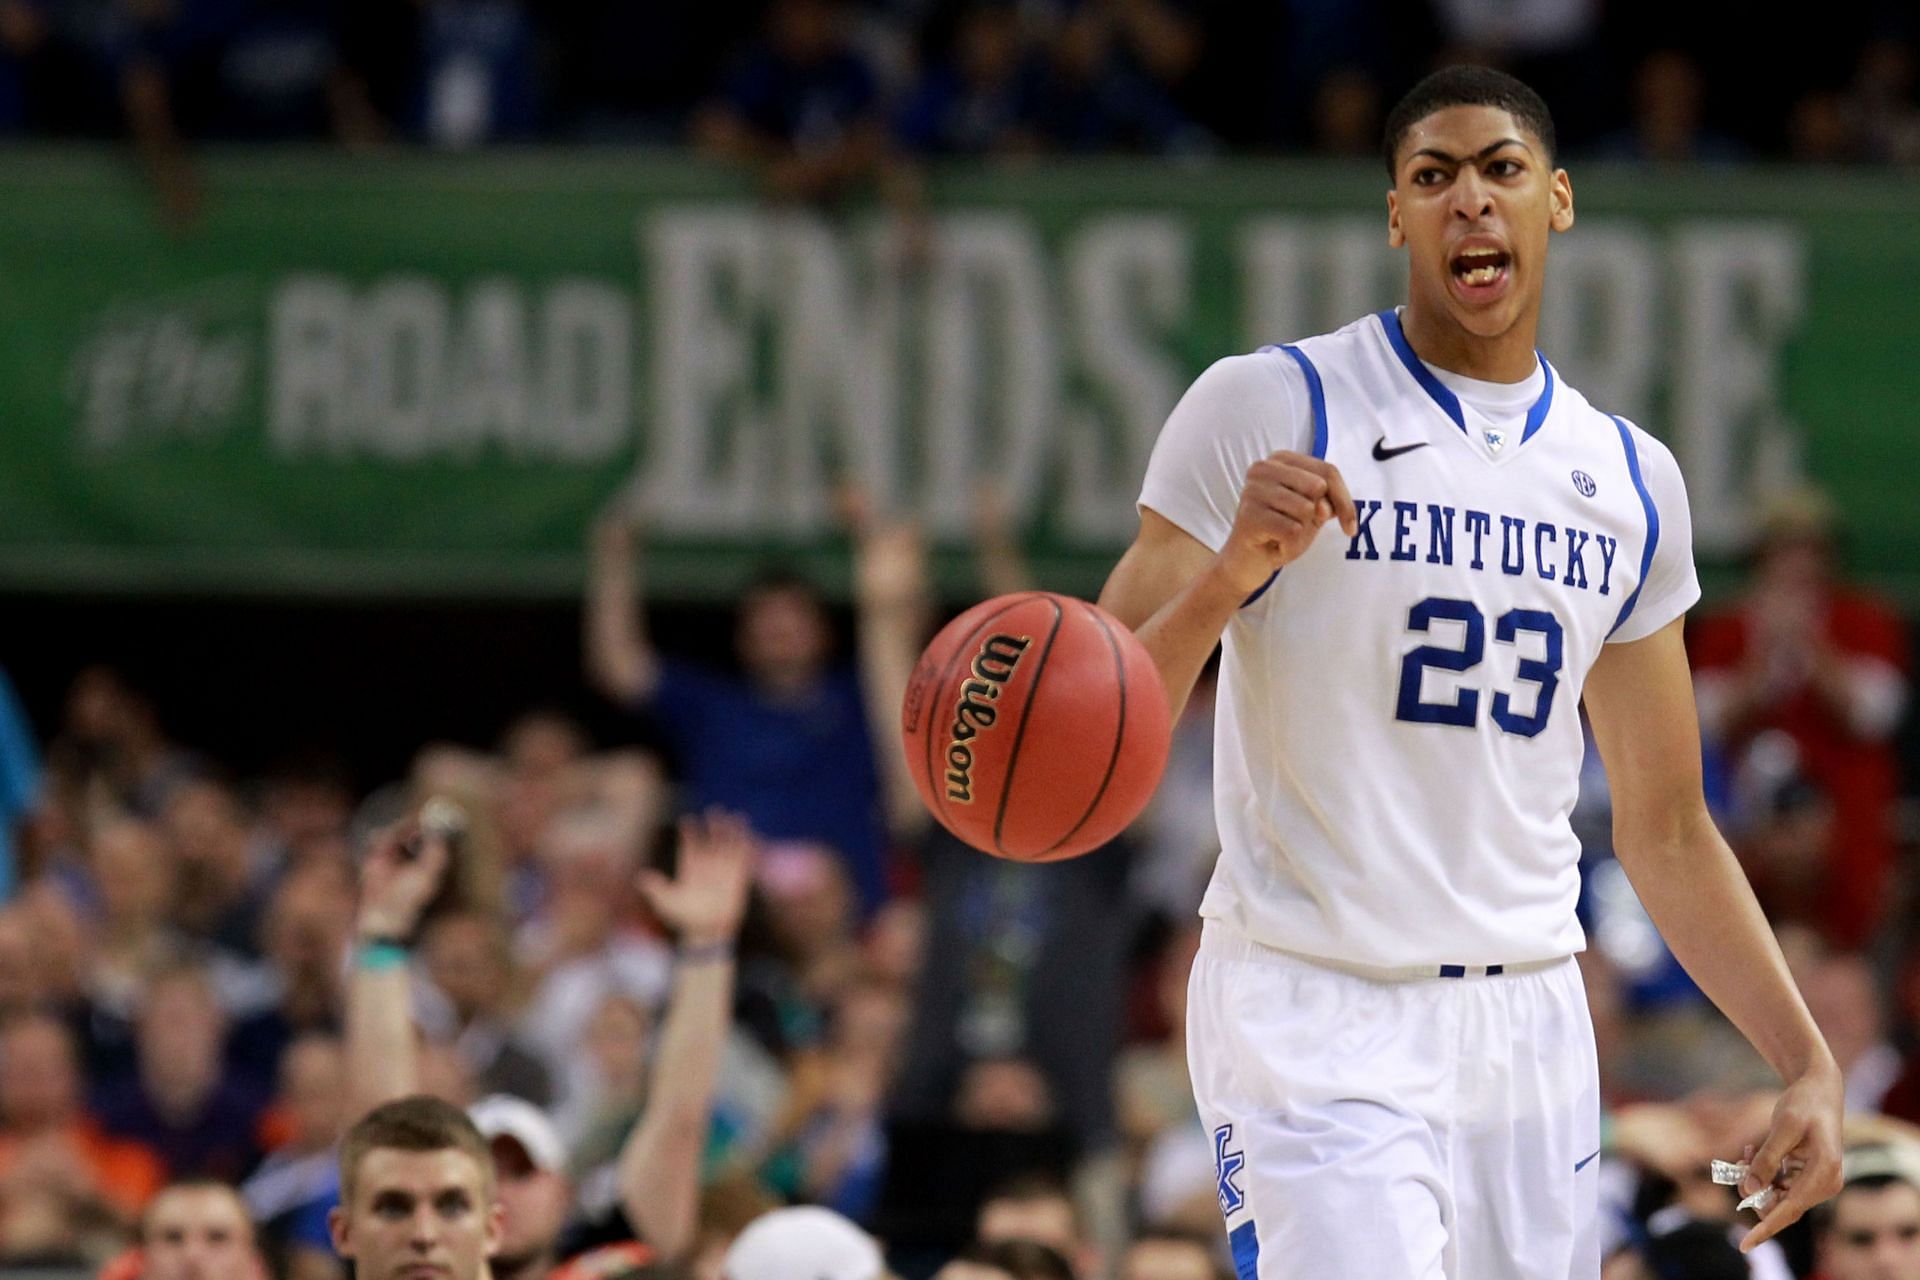 Anthony Davis led Kentucky to its last NCAA title in 2012.